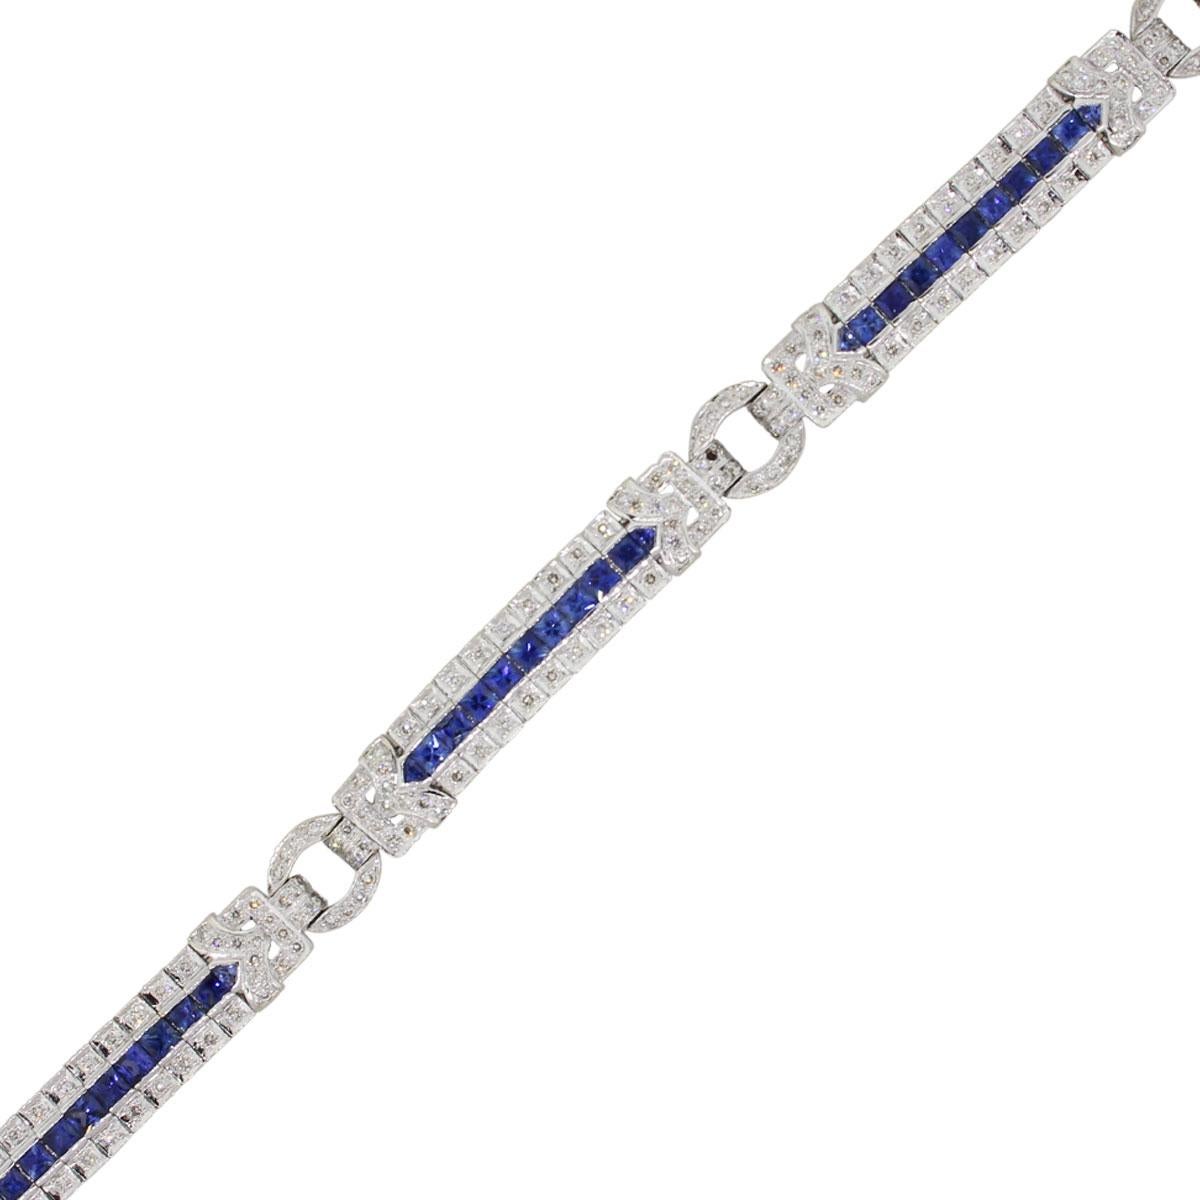 Material: 18k white gold
Diamond Details: Approximately 3.60ctw of round brilliant diamonds. Diamonds are I/J in color, SI in clarity
Gemstone Details: Princess cut blue sapphires measuring approximately 4mm x 4mm and trillion shape sapphires